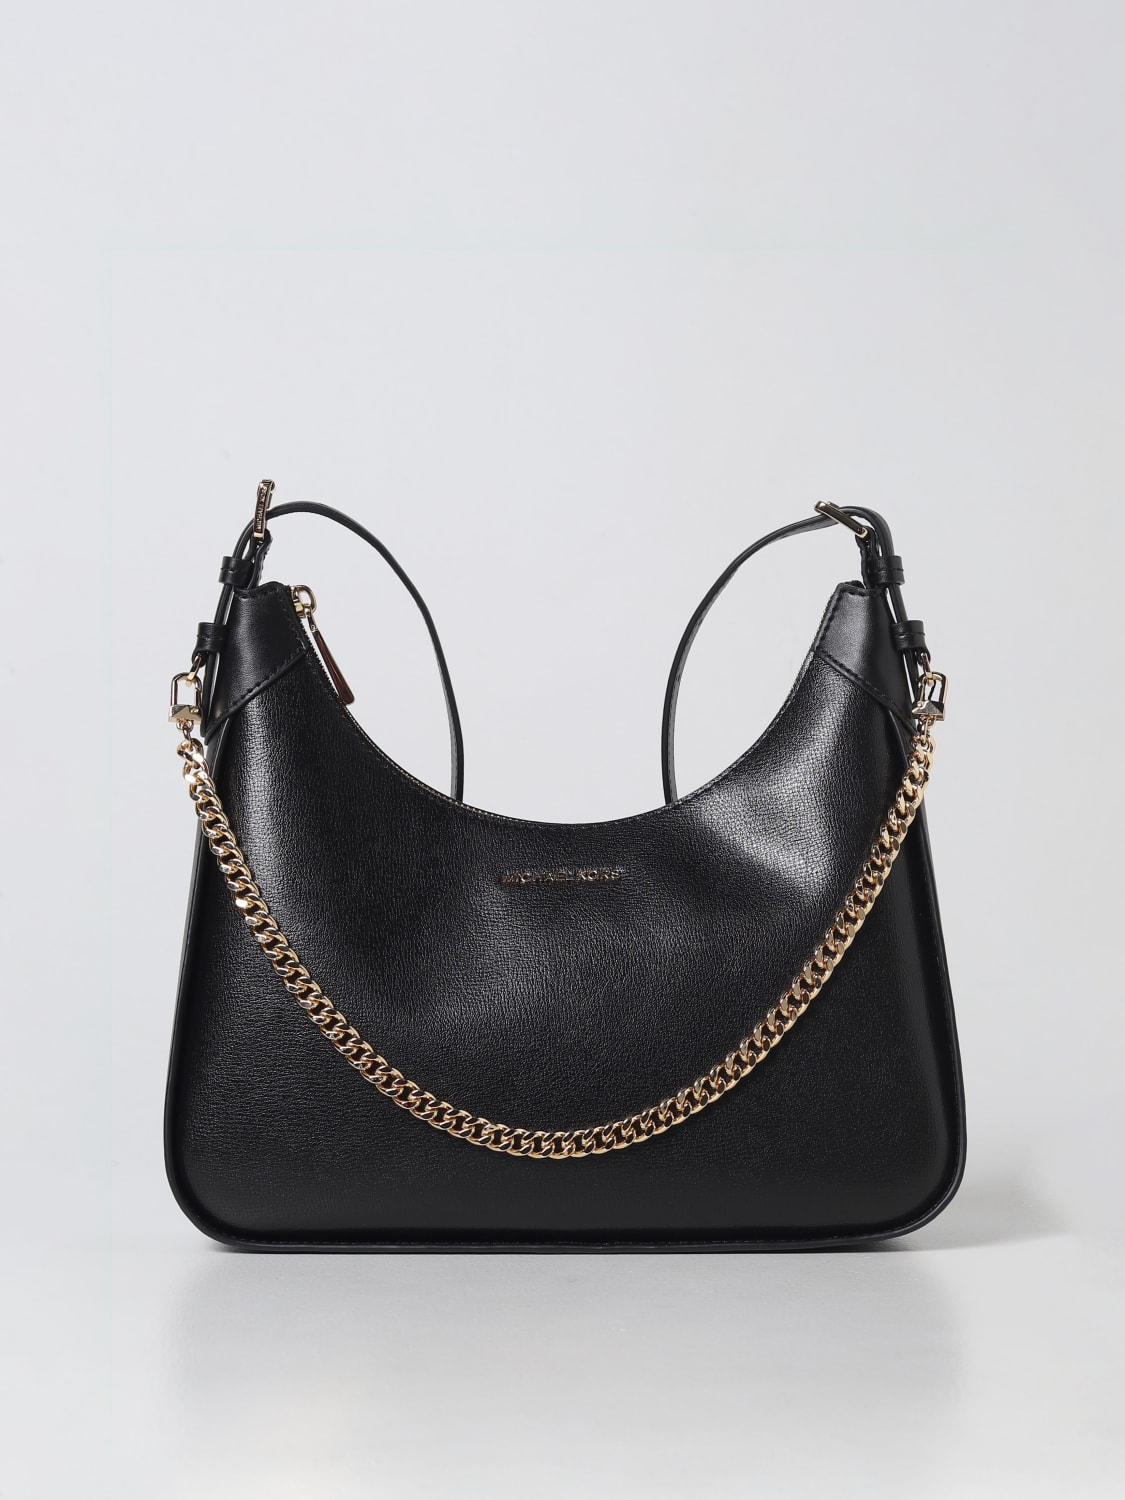 Michael Kors Outlet: Michael Wilma bag in micro grain leather